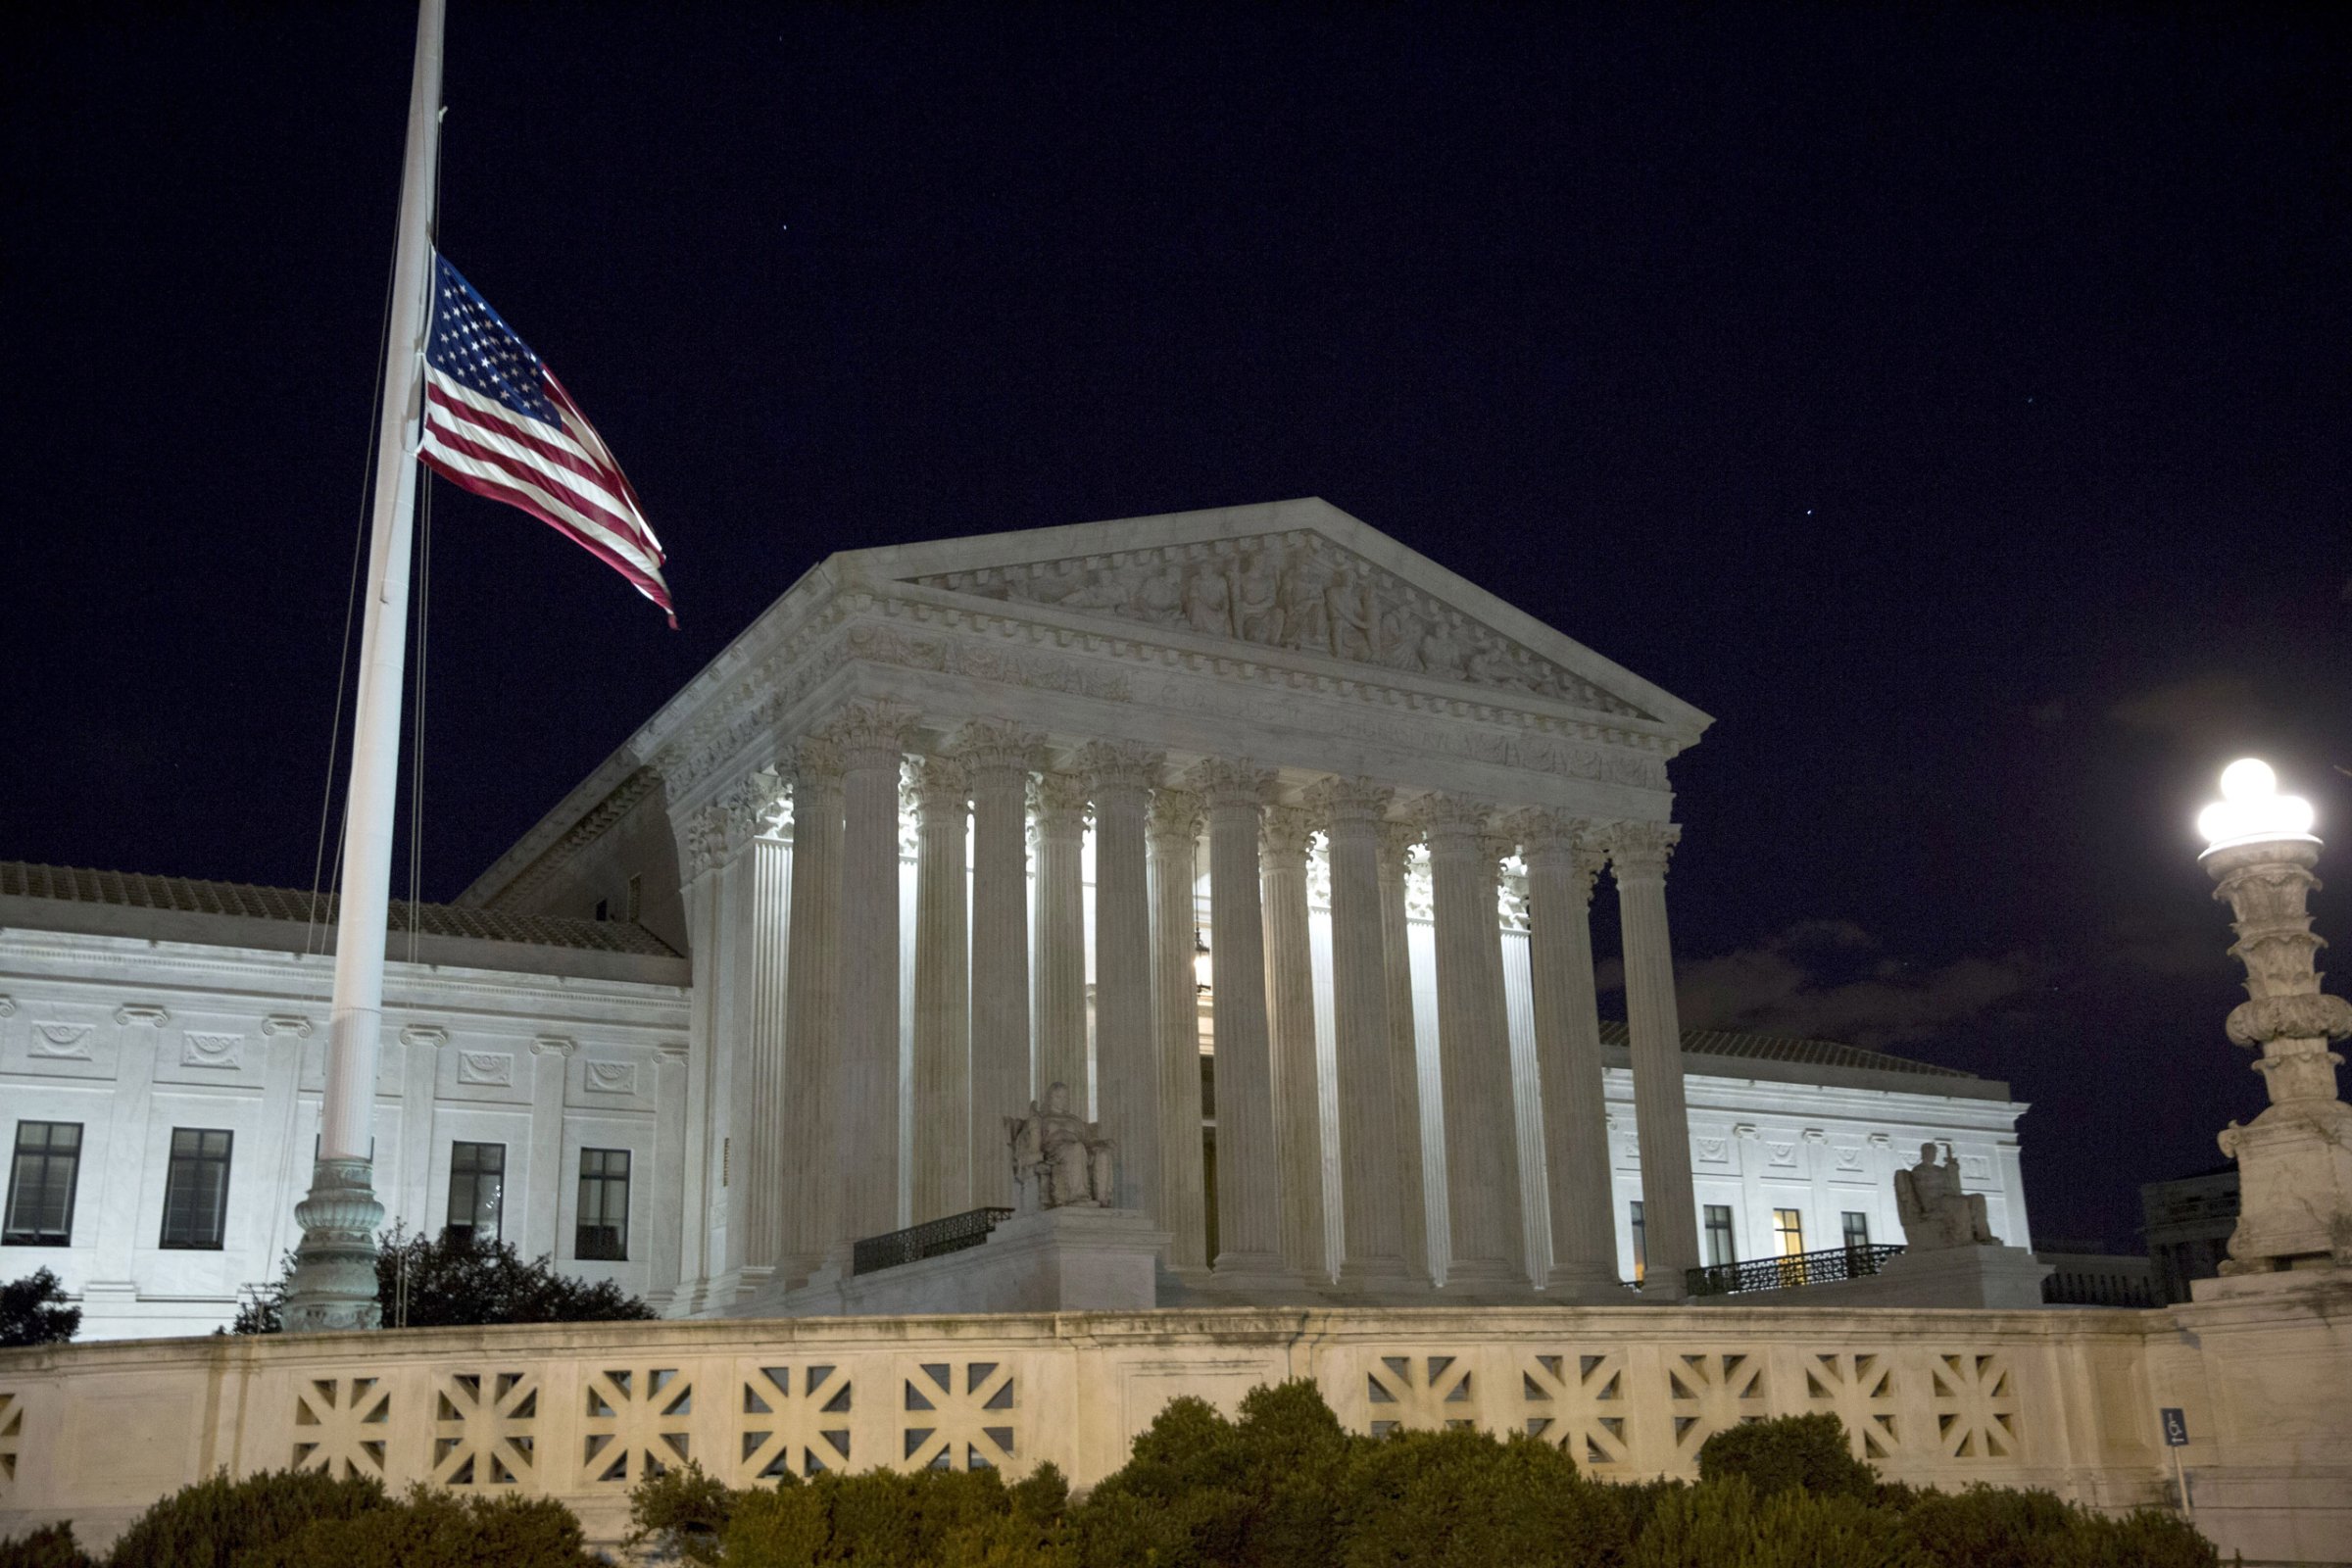 WASHINGTON, DC - FEBRUARY 13: The American flag flies at half mast at the U.S. Supreme Court February 13, 2016 in Washington, DC. Supreme Court Justice Antonin Scalia was at a Texas Ranch Saturday morning when he died at the age of 79. (Photo by Drew Angerer/Getty Images)